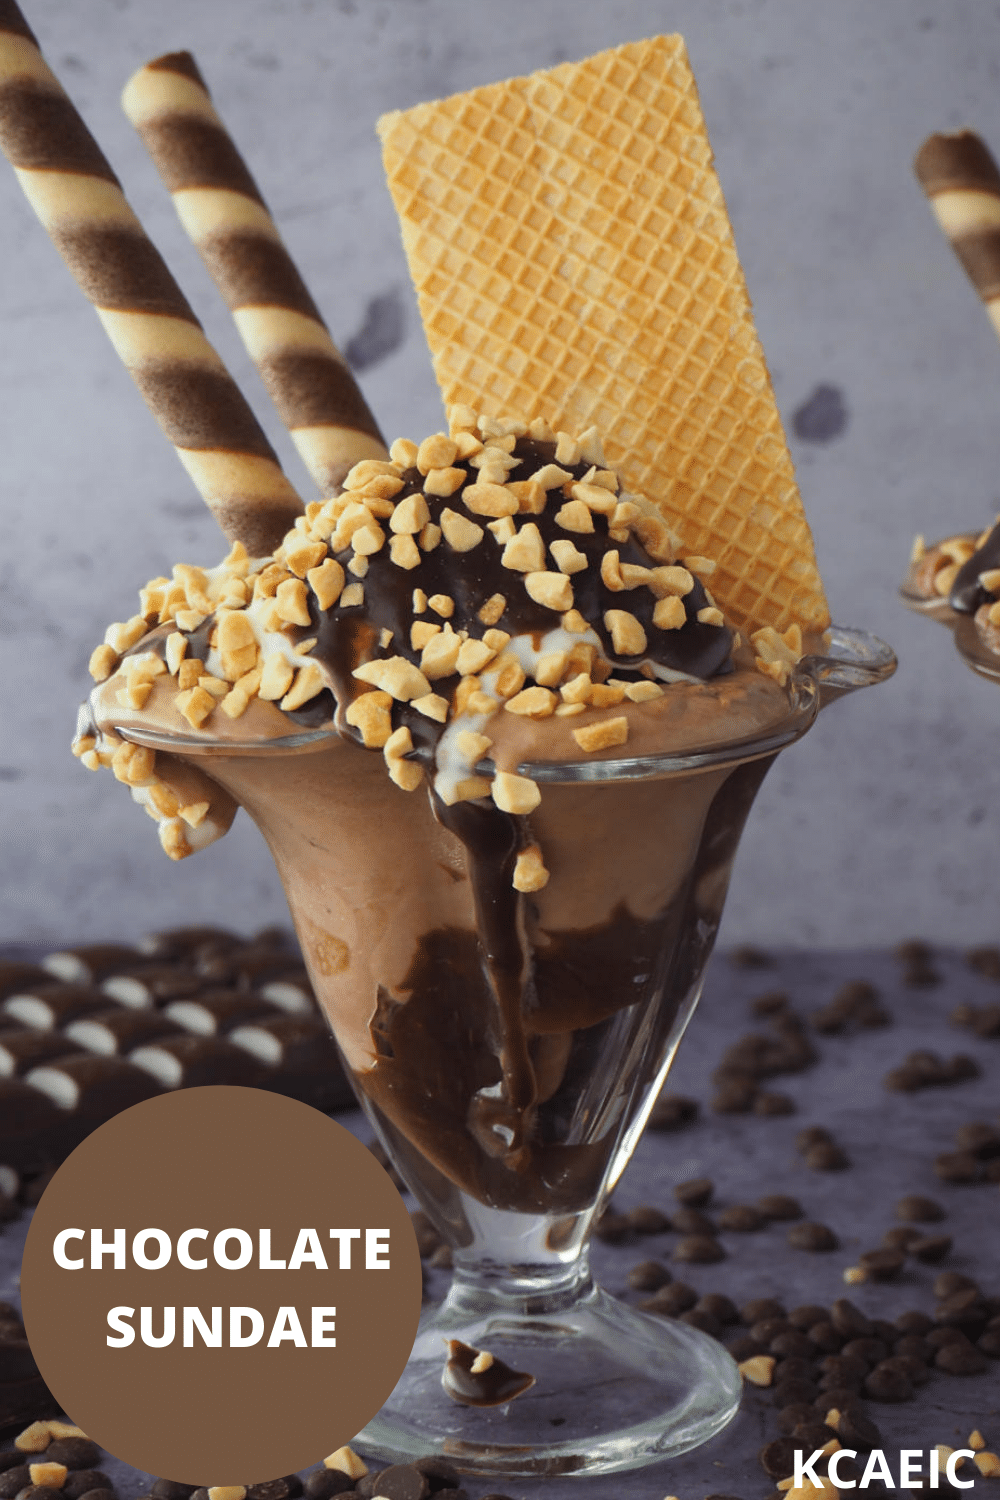 Side view of chocolate sundae in tall sundae glasses, with chocolate fudge sauce, chocolate ice cream, whipped cream, chopped nuts and chocolate and vanilla circular tube wafers, on a grey background, surrounded by chocolate pieces, chocolate chips and some chopped nuts, with text overlay, chocolate sundae and KCAEIC.